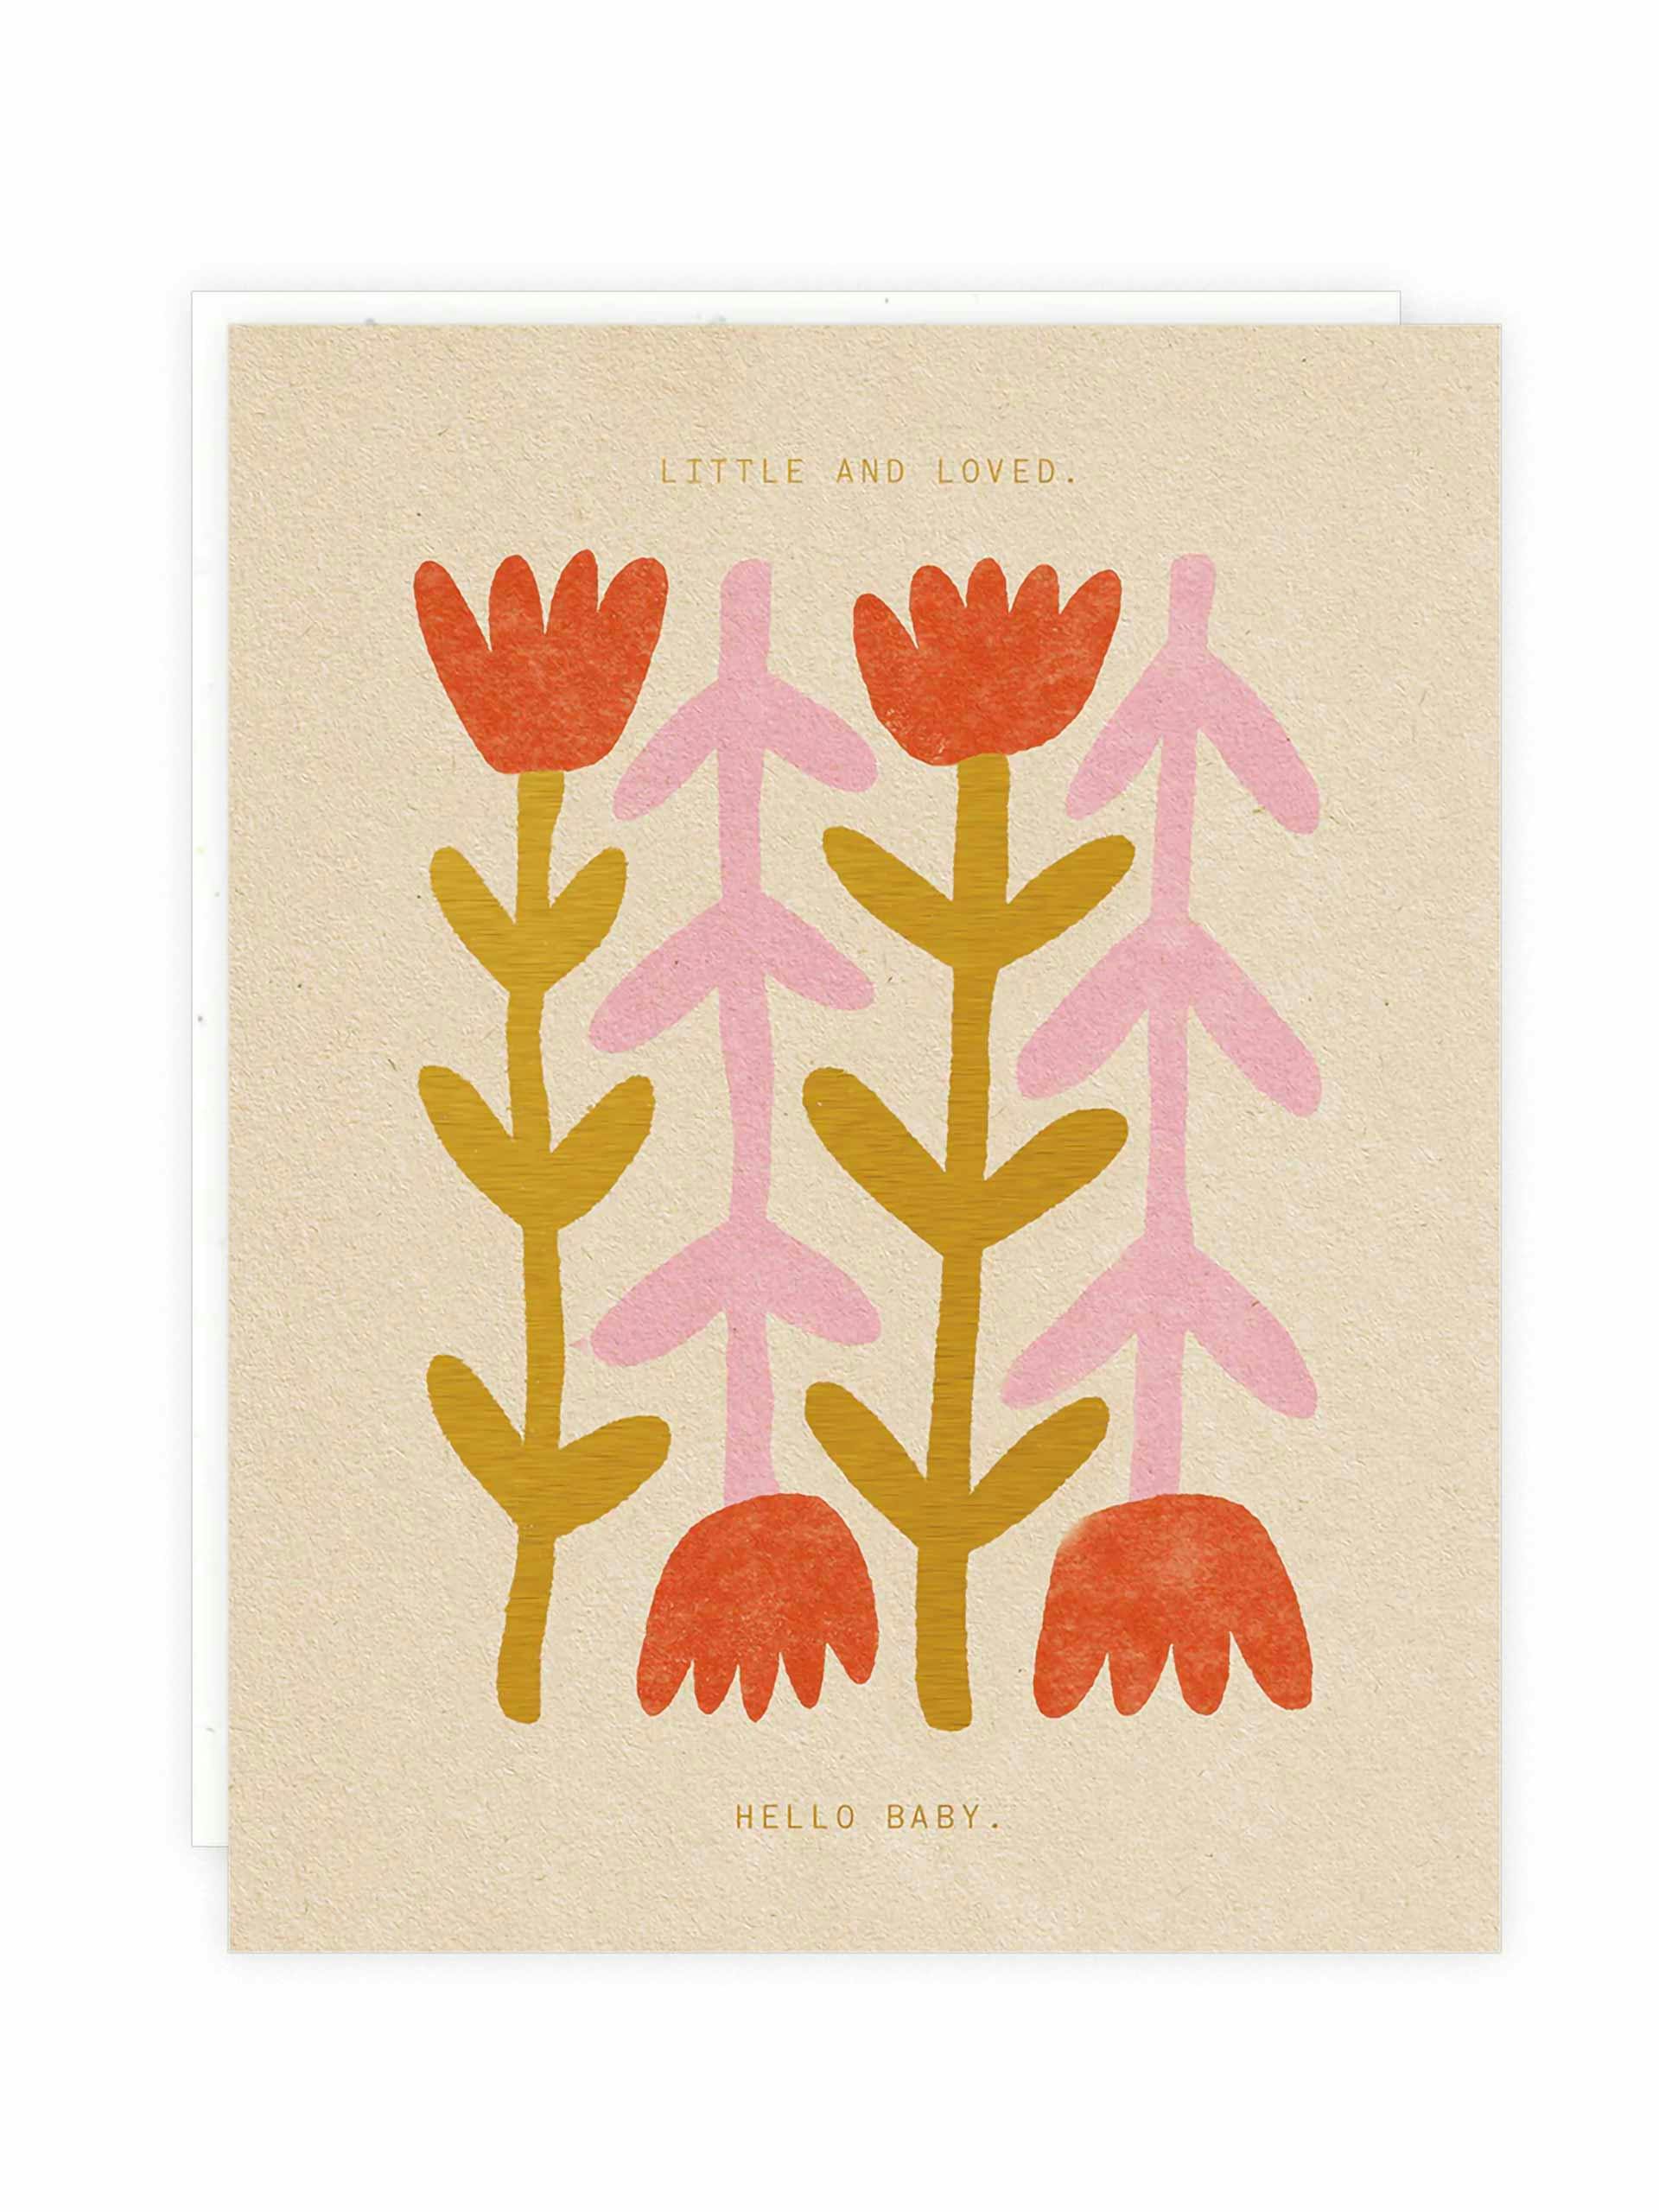 ‘Little And Loved’ card